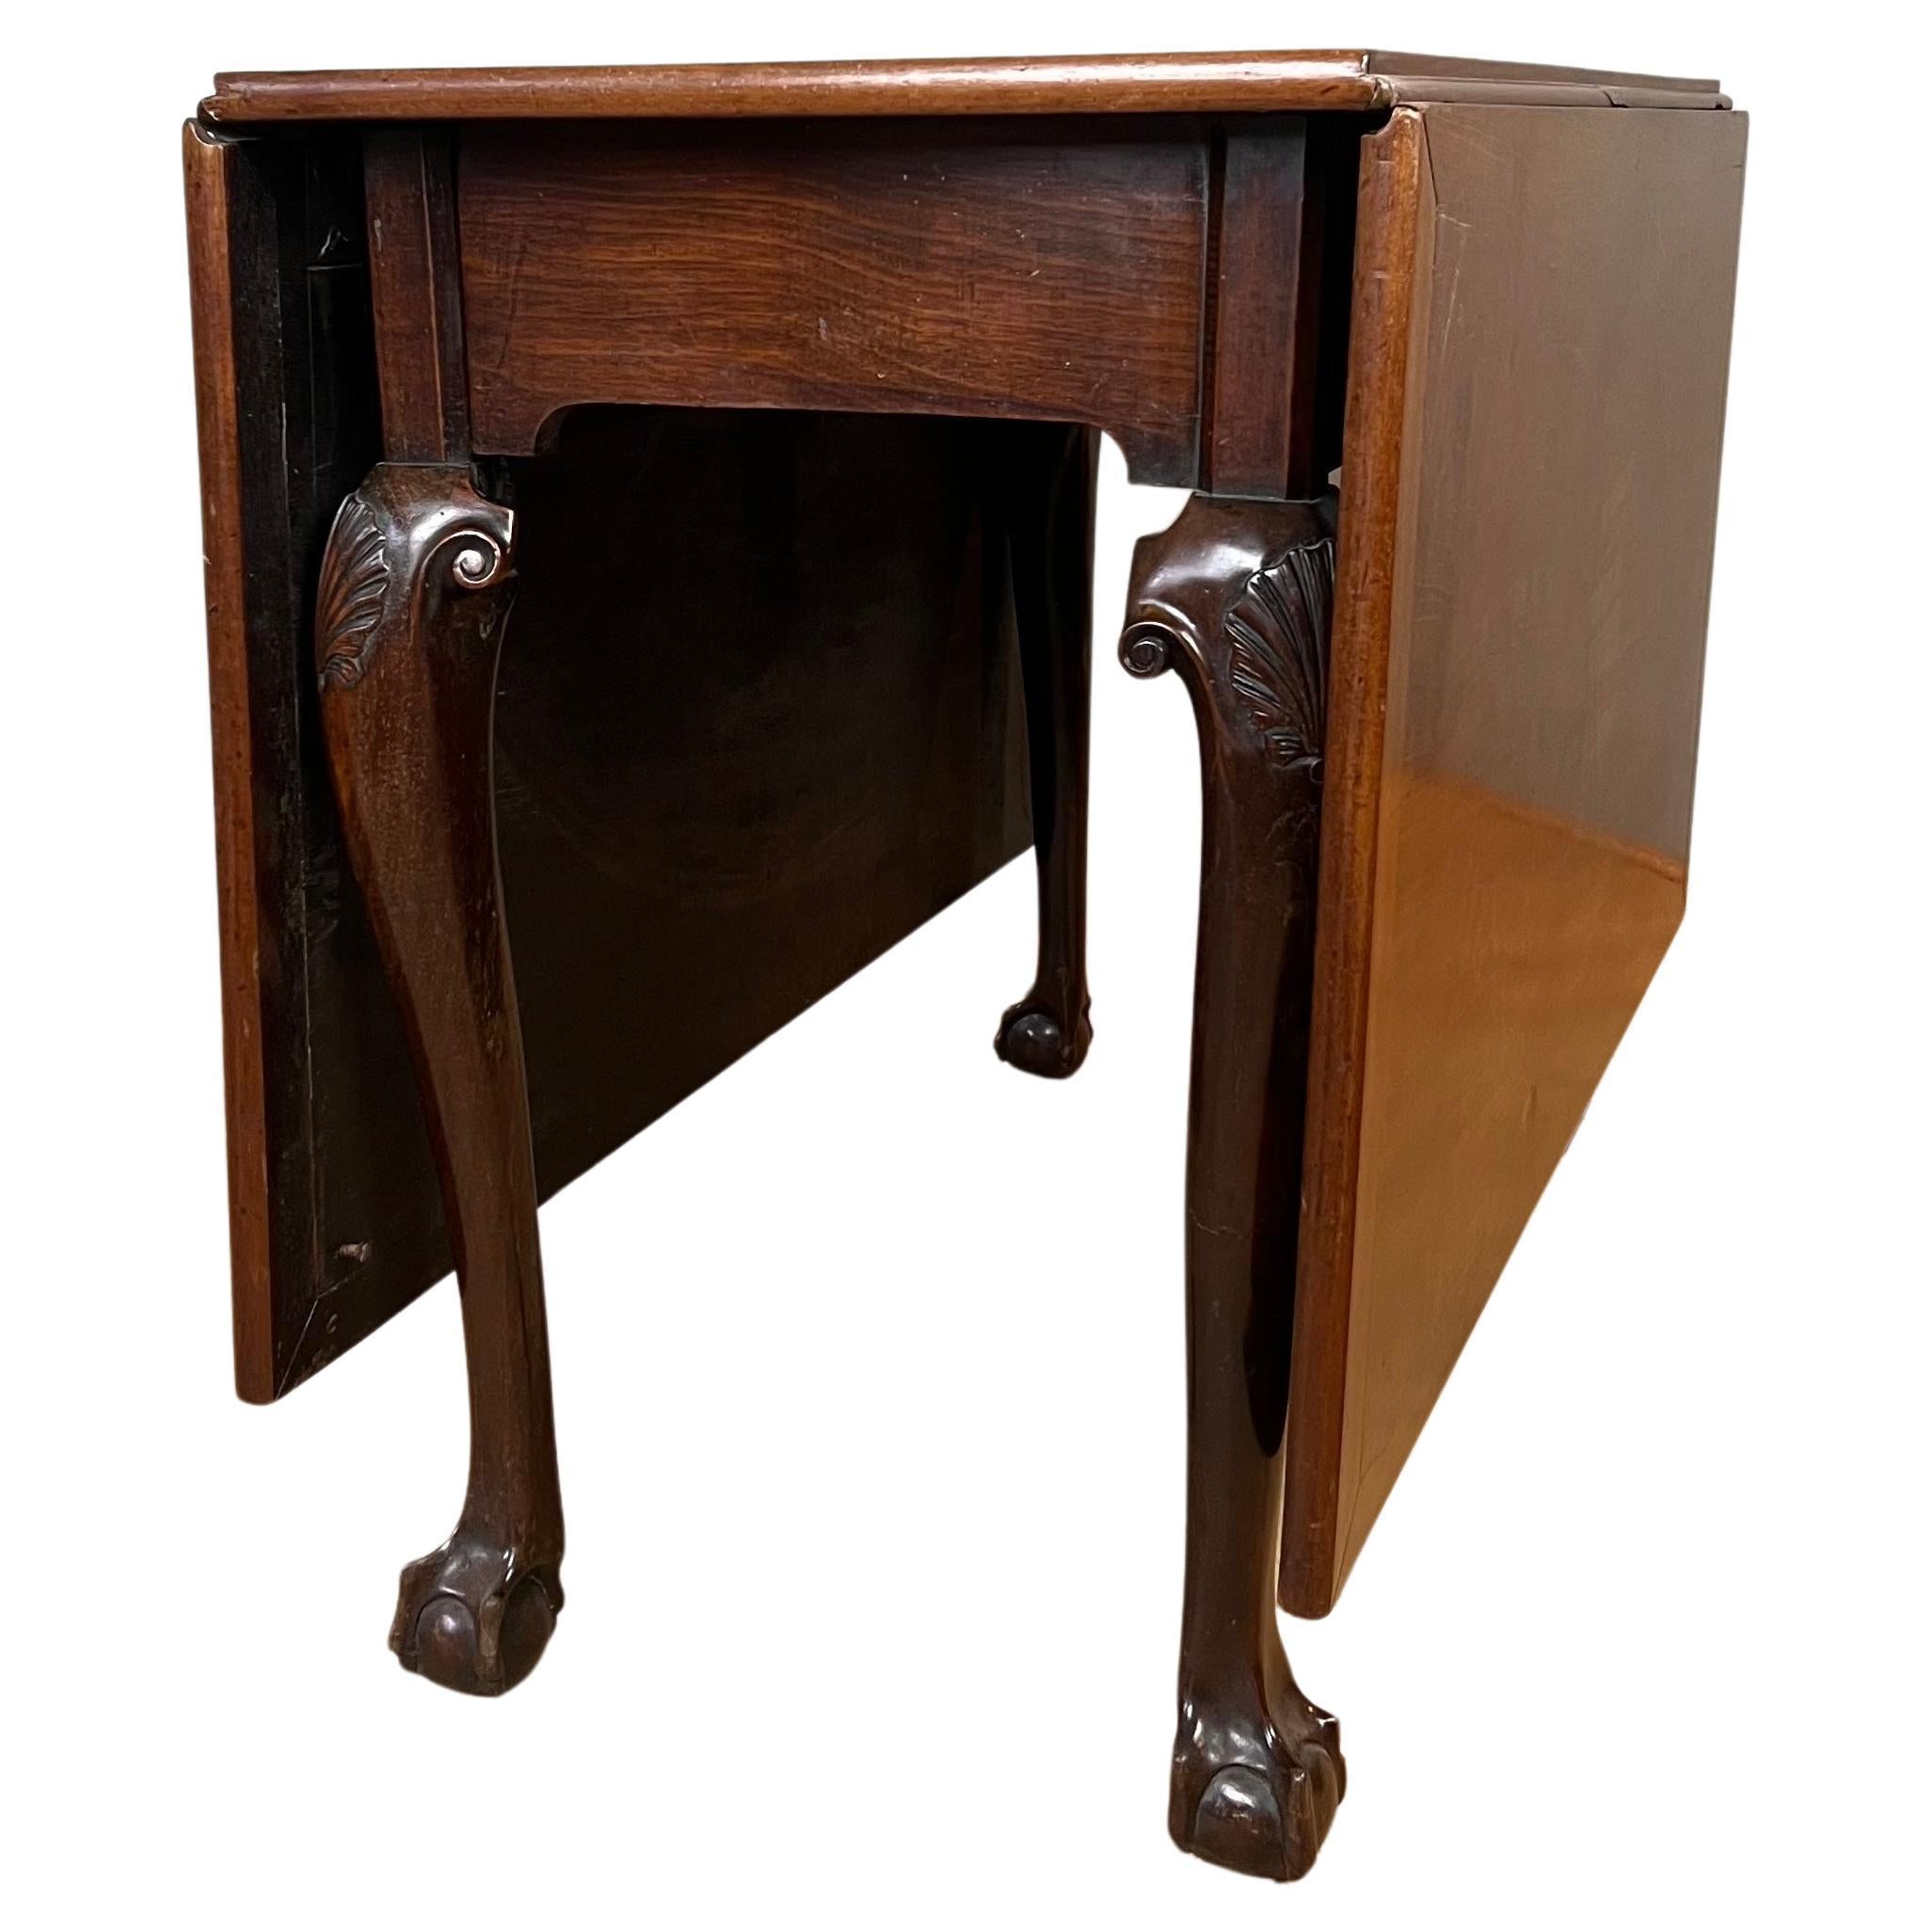 Made in 1750 out of the finest Cuban mahogany, this is a extremely handsome Irish gateleg table. The timber has wonderful mellow caramel hues and the top is unusual being clamped ended to keep it straight. The elegant cabriole legs have scroll ear